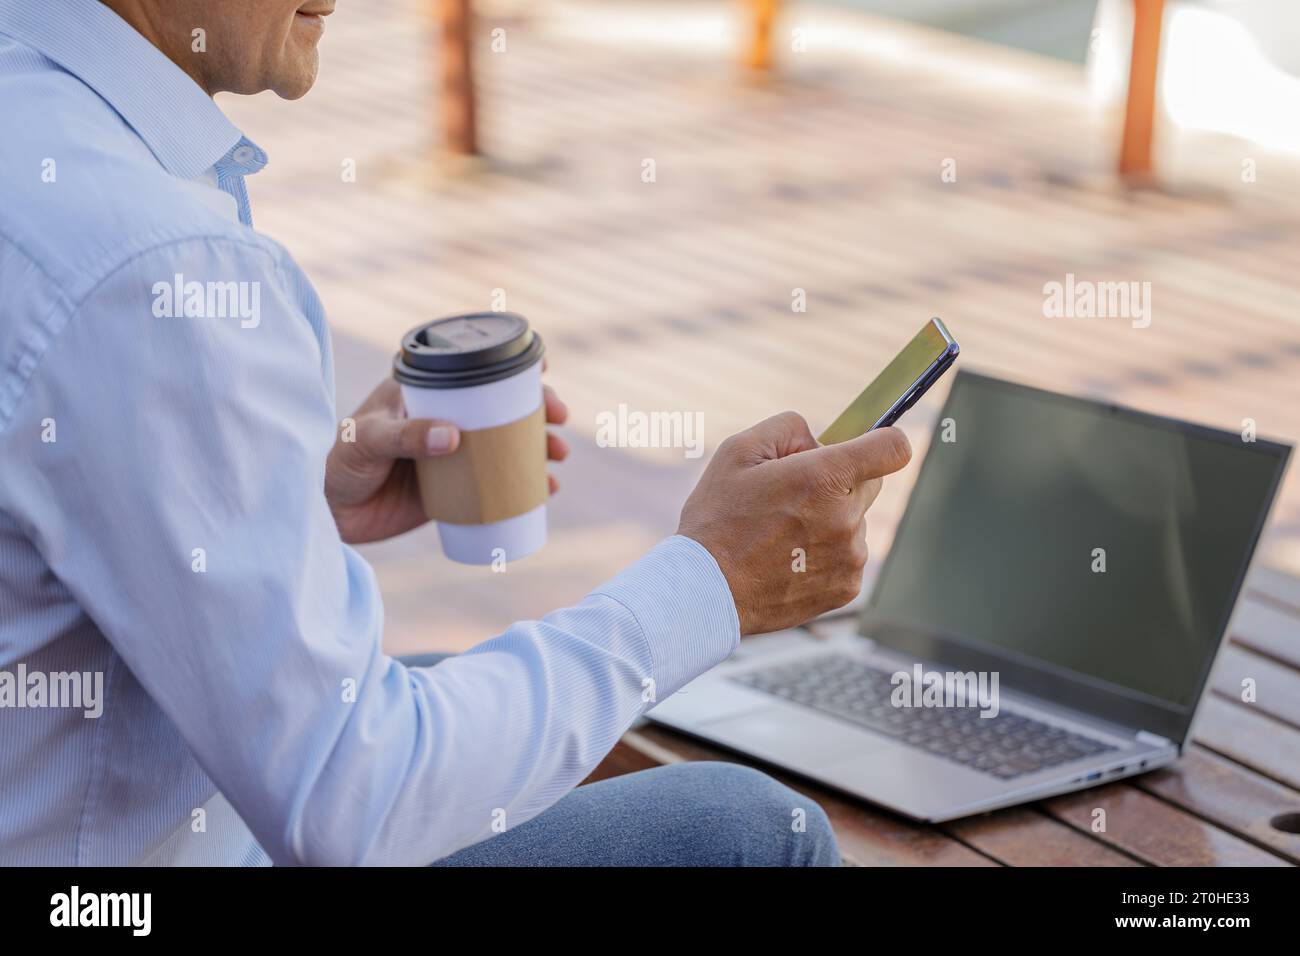 Detail of the hands of a Latin man holding a mobile phone in front of a laptop. Stock Photo